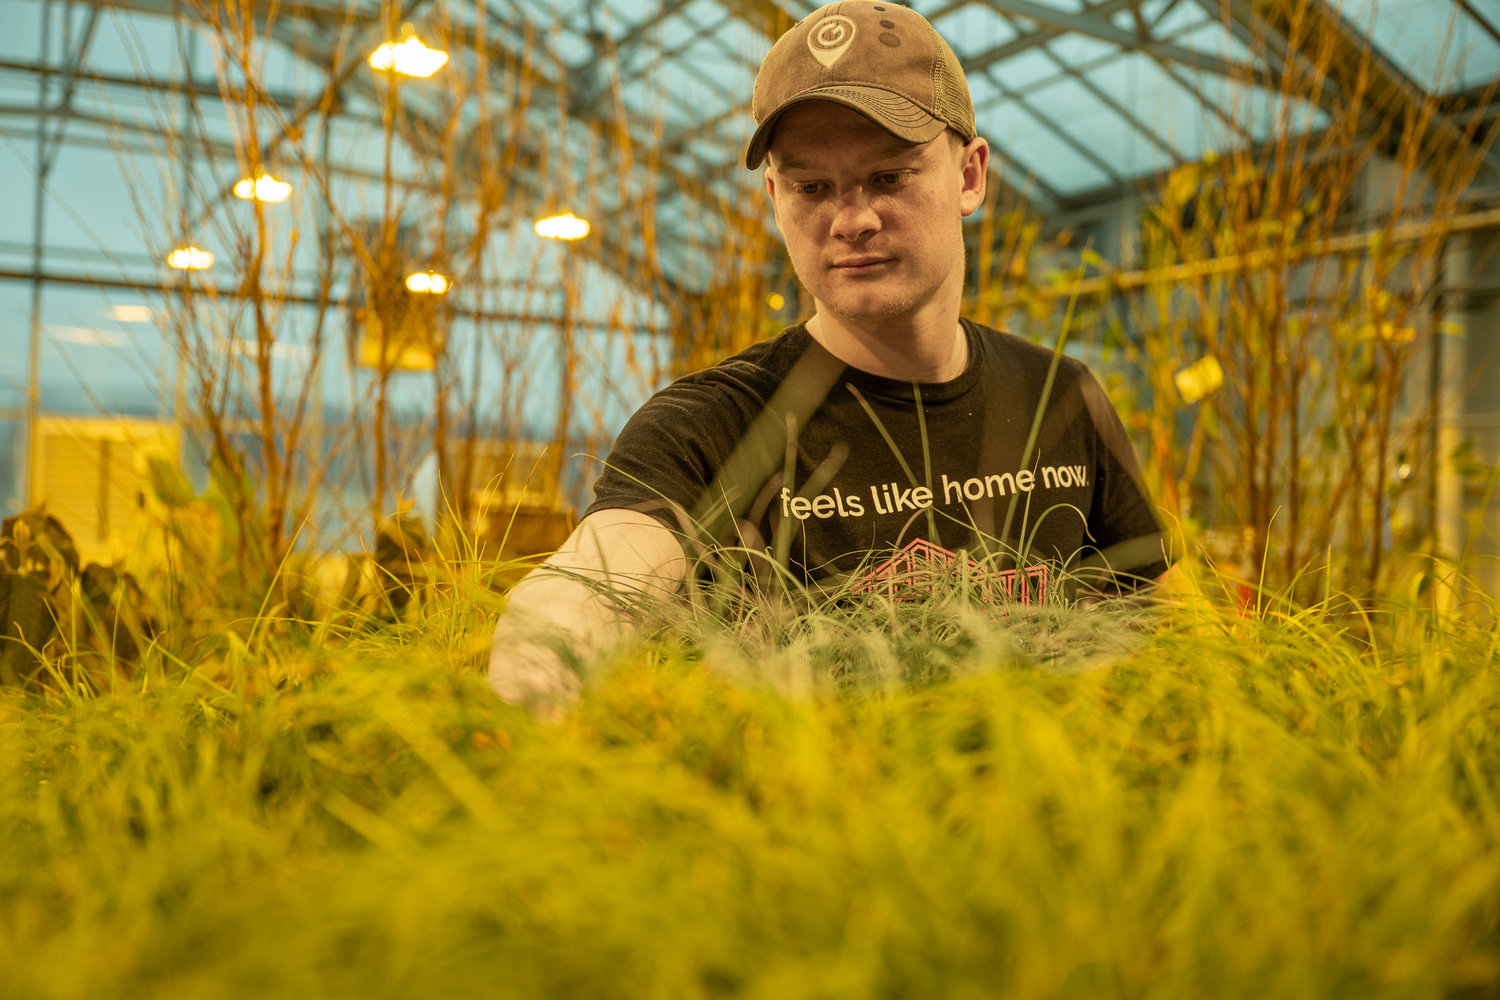 Landscape Architecture major Braden Gobrecht works in the greenhouse at Delaware Valley University. in the weeks before the Philadelphia Flower Show. Delaware Valley University has been taking part in the show for more than 50 years.